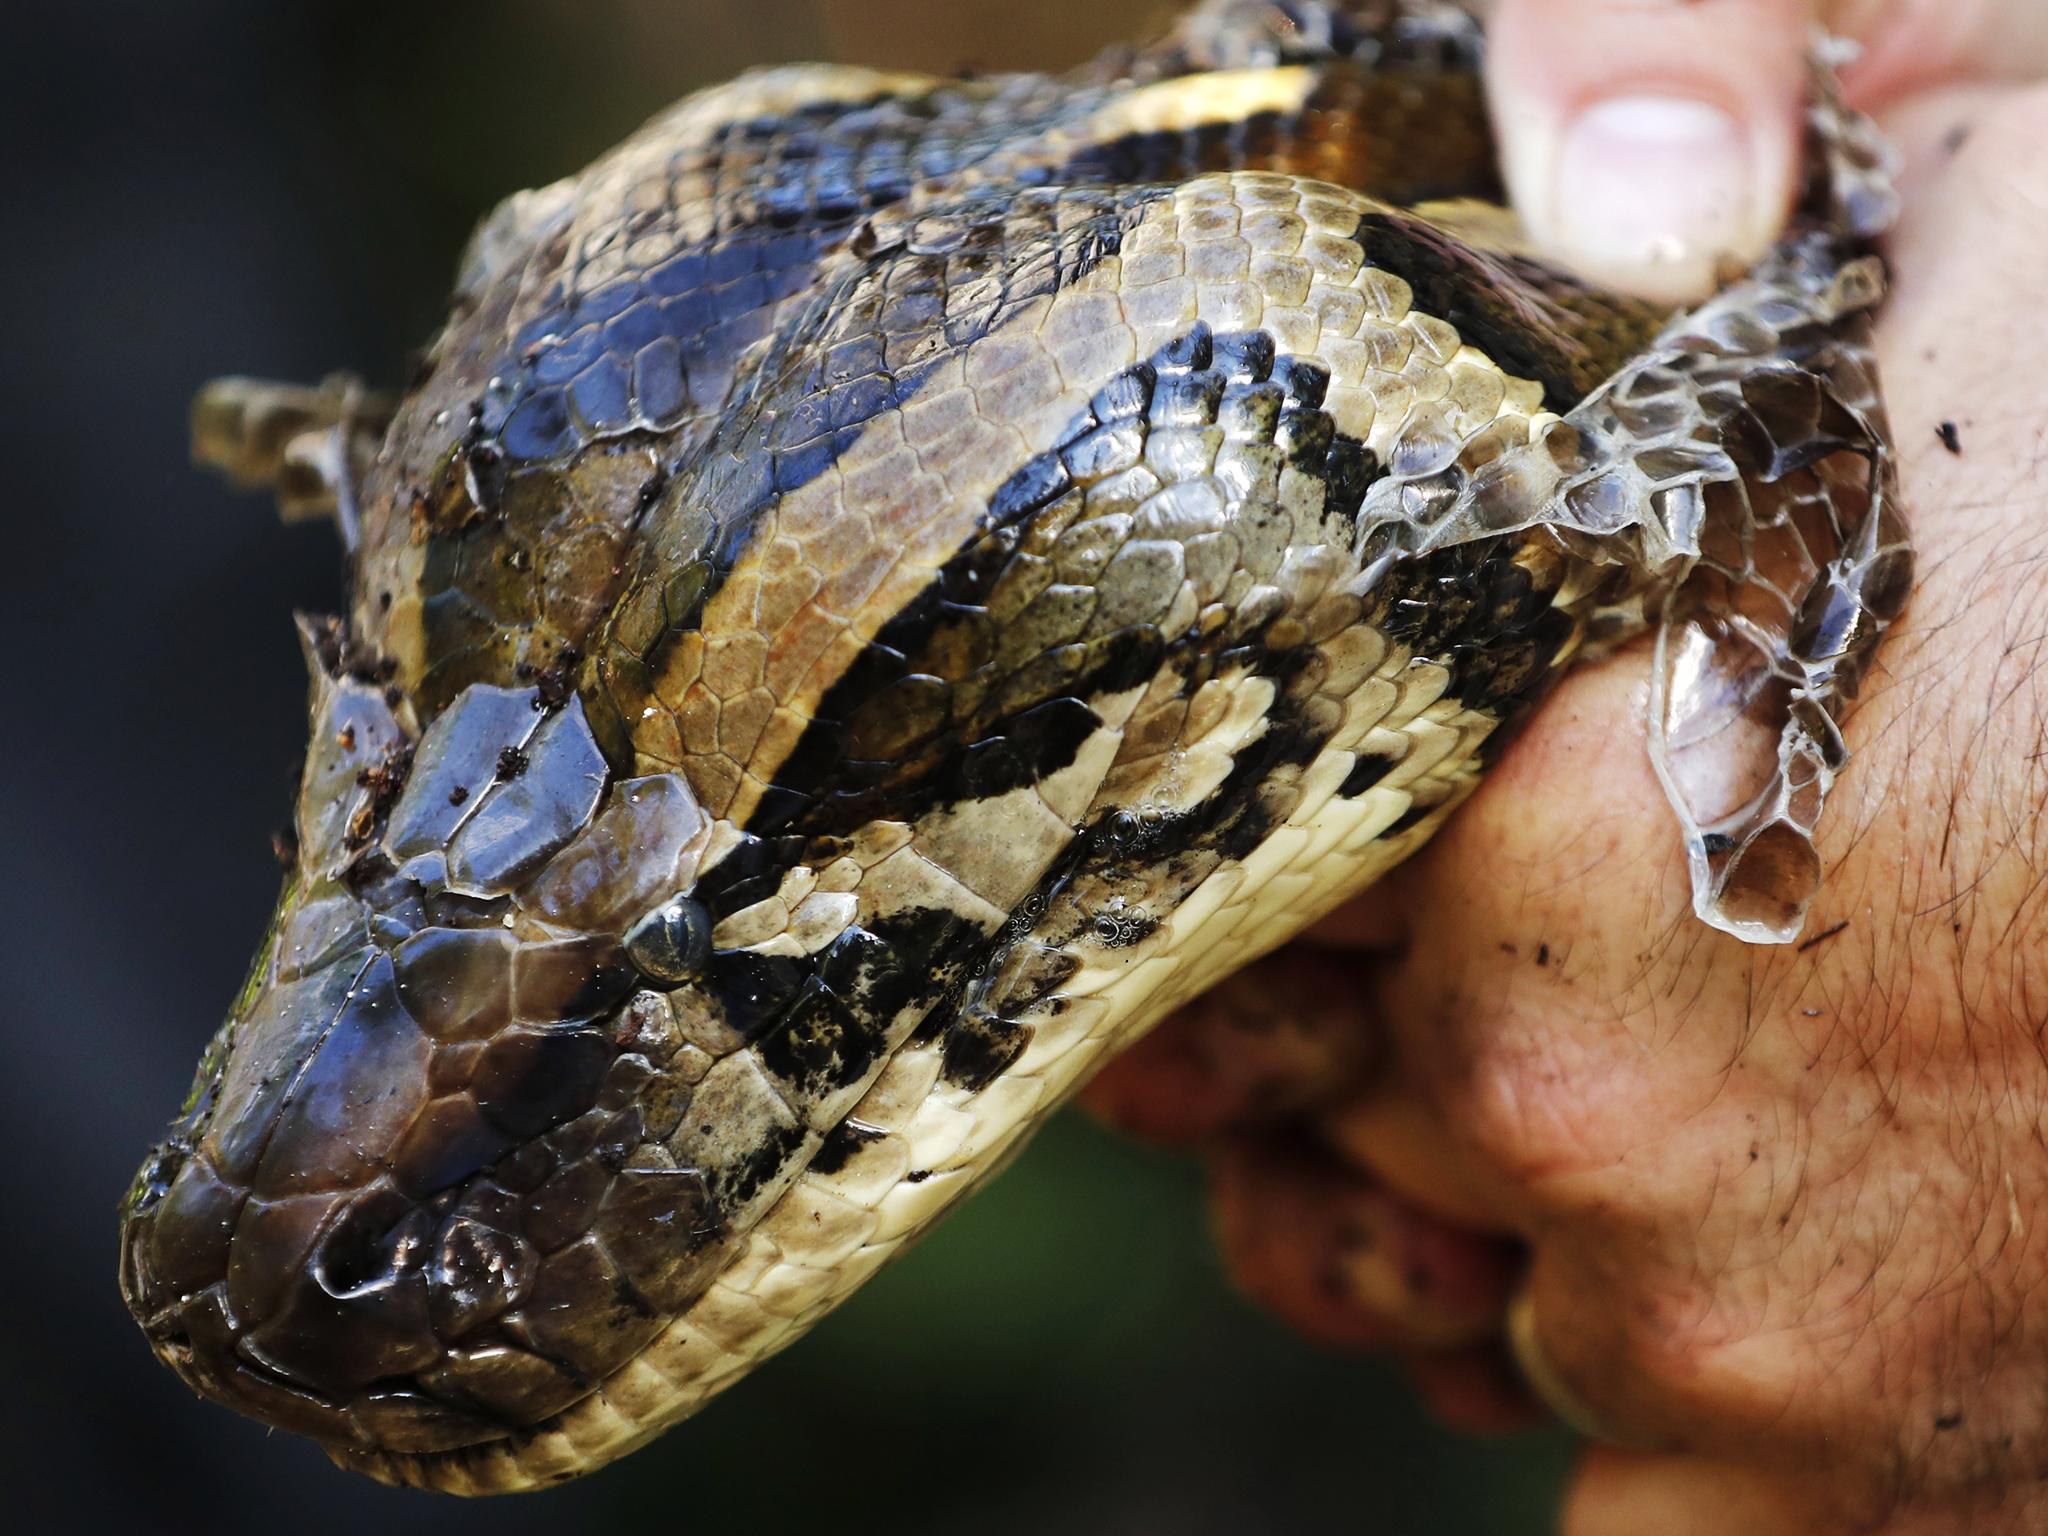 Burmese pythons are an invasive species to Florida's everglades